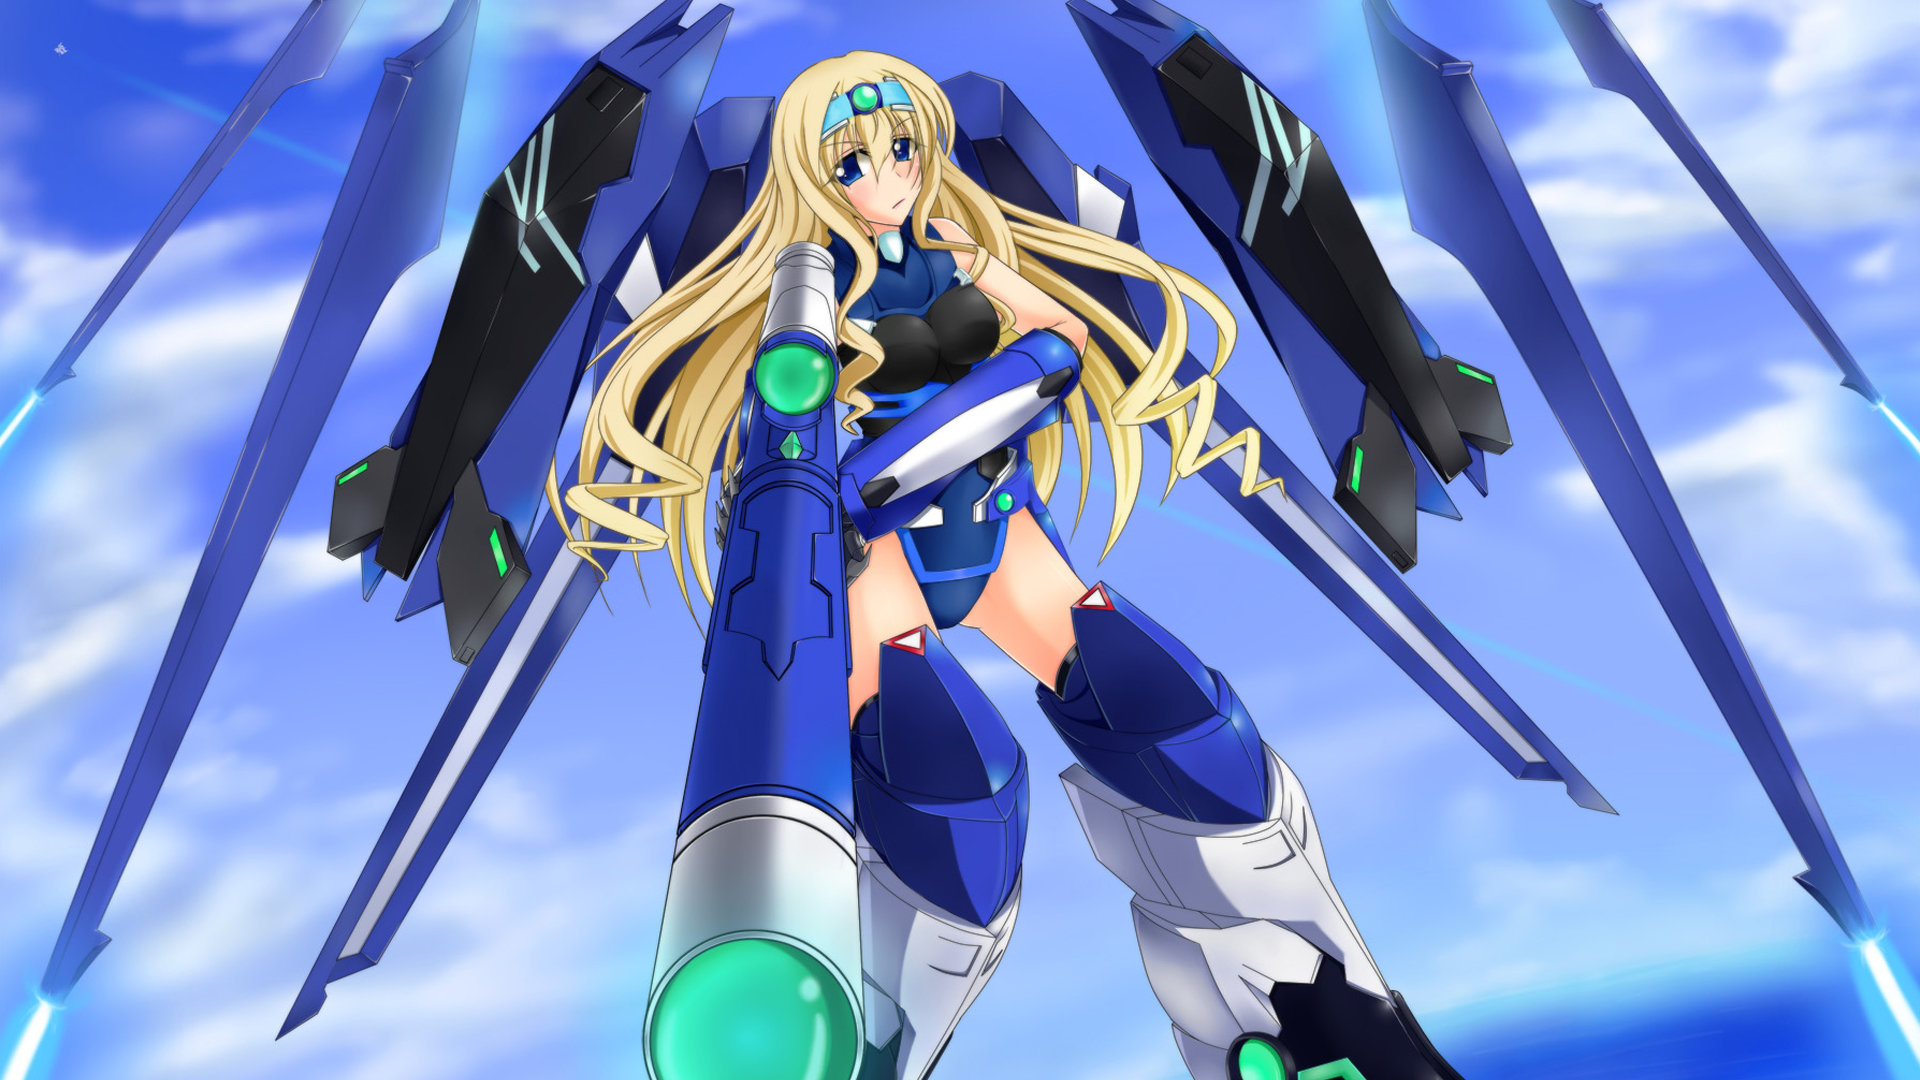 Download hd 1920x1080 Infinite Stratos desktop background ID:163131 for free